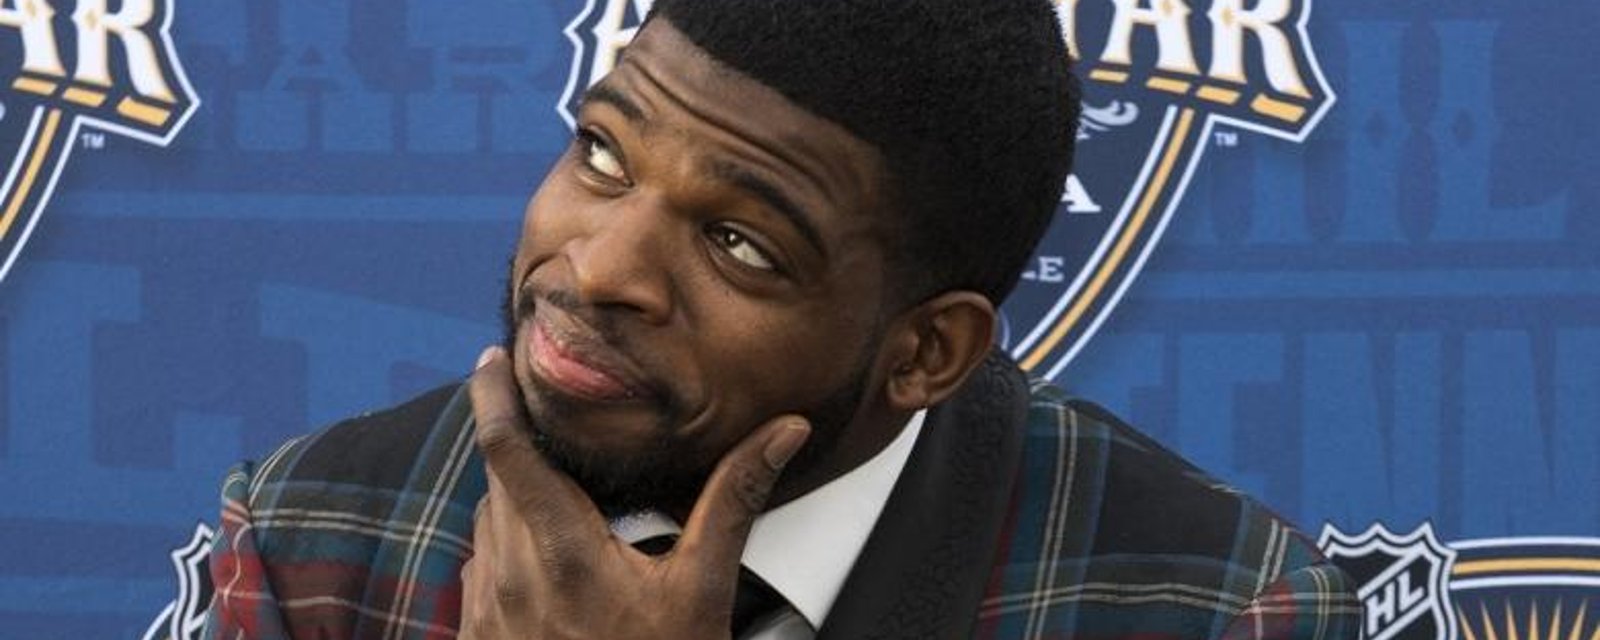 Subban makes a big announcement for his fans in Montreal.